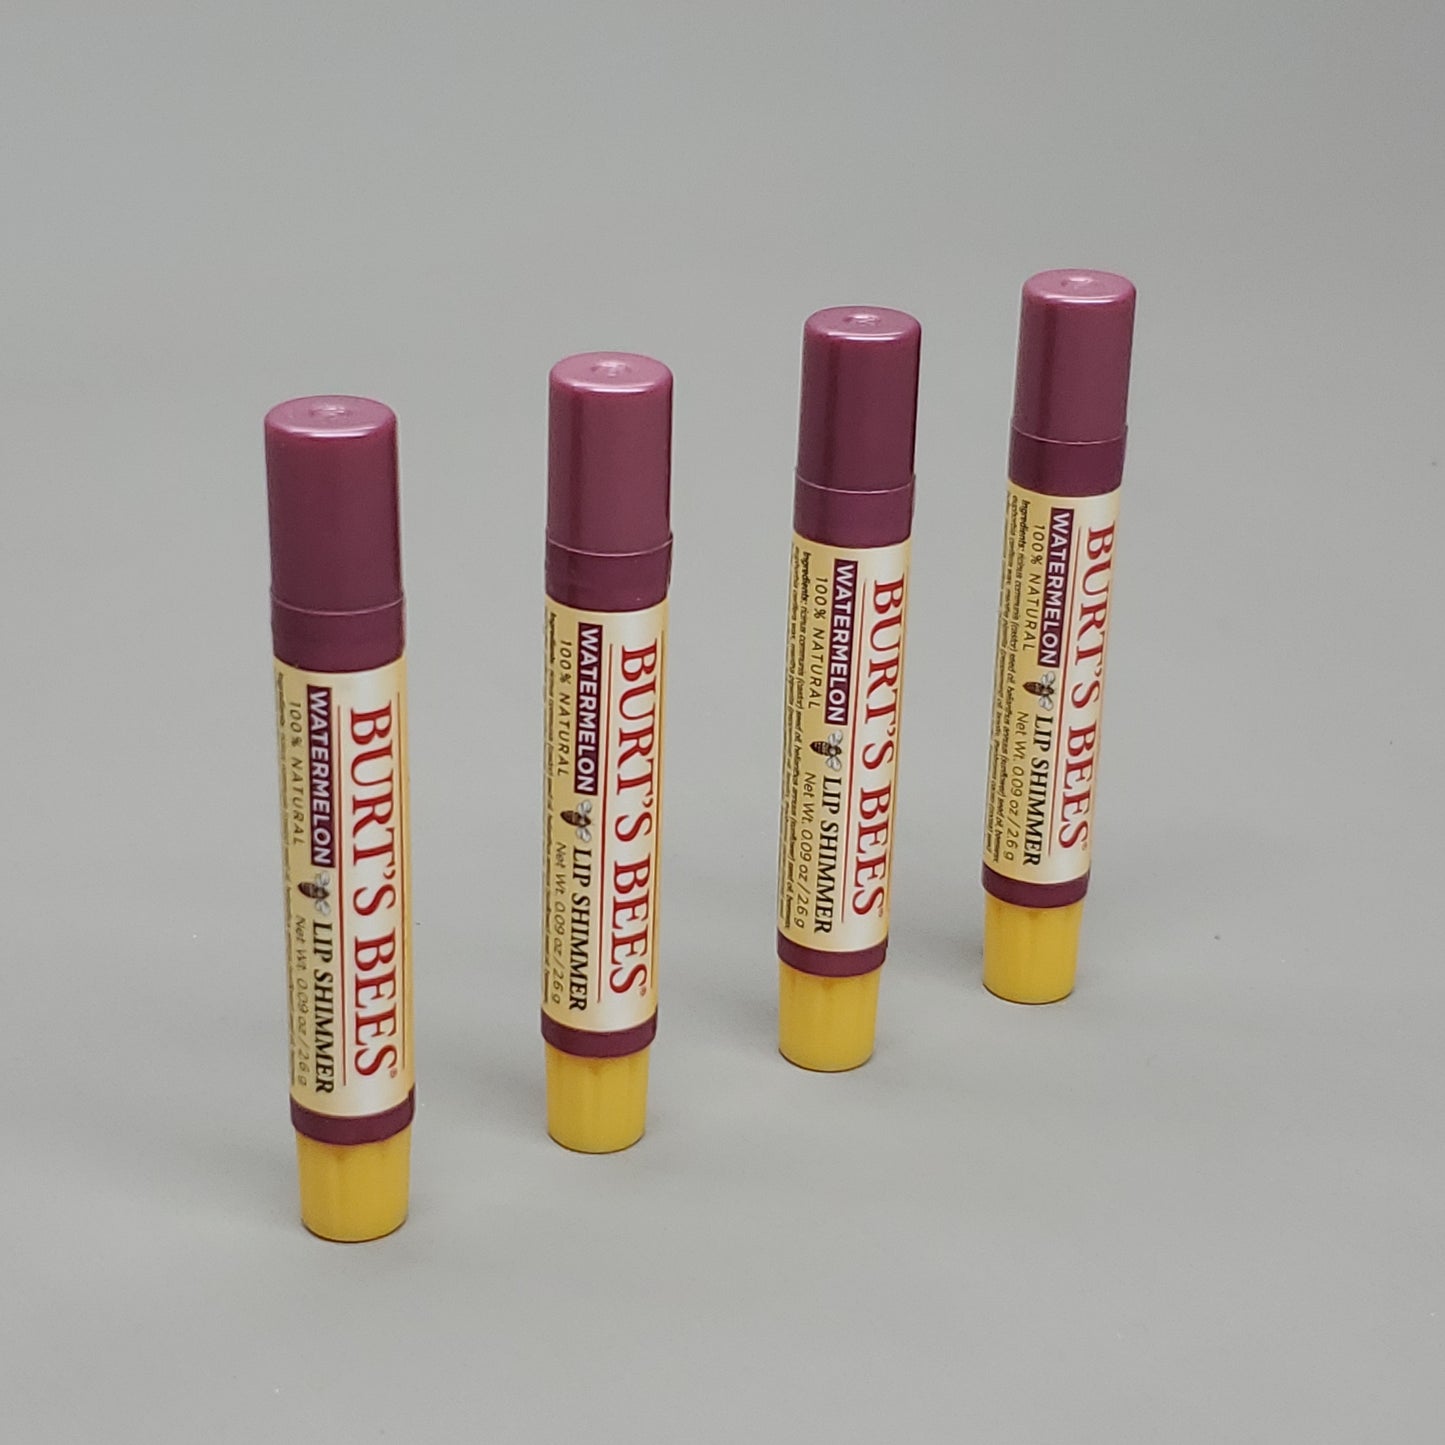 ZA@ BURT'S BEES Lip Shimmer Watermelon 4-Pack 100% Natural .09 oz BBD Mar 2023 (AS-IS)